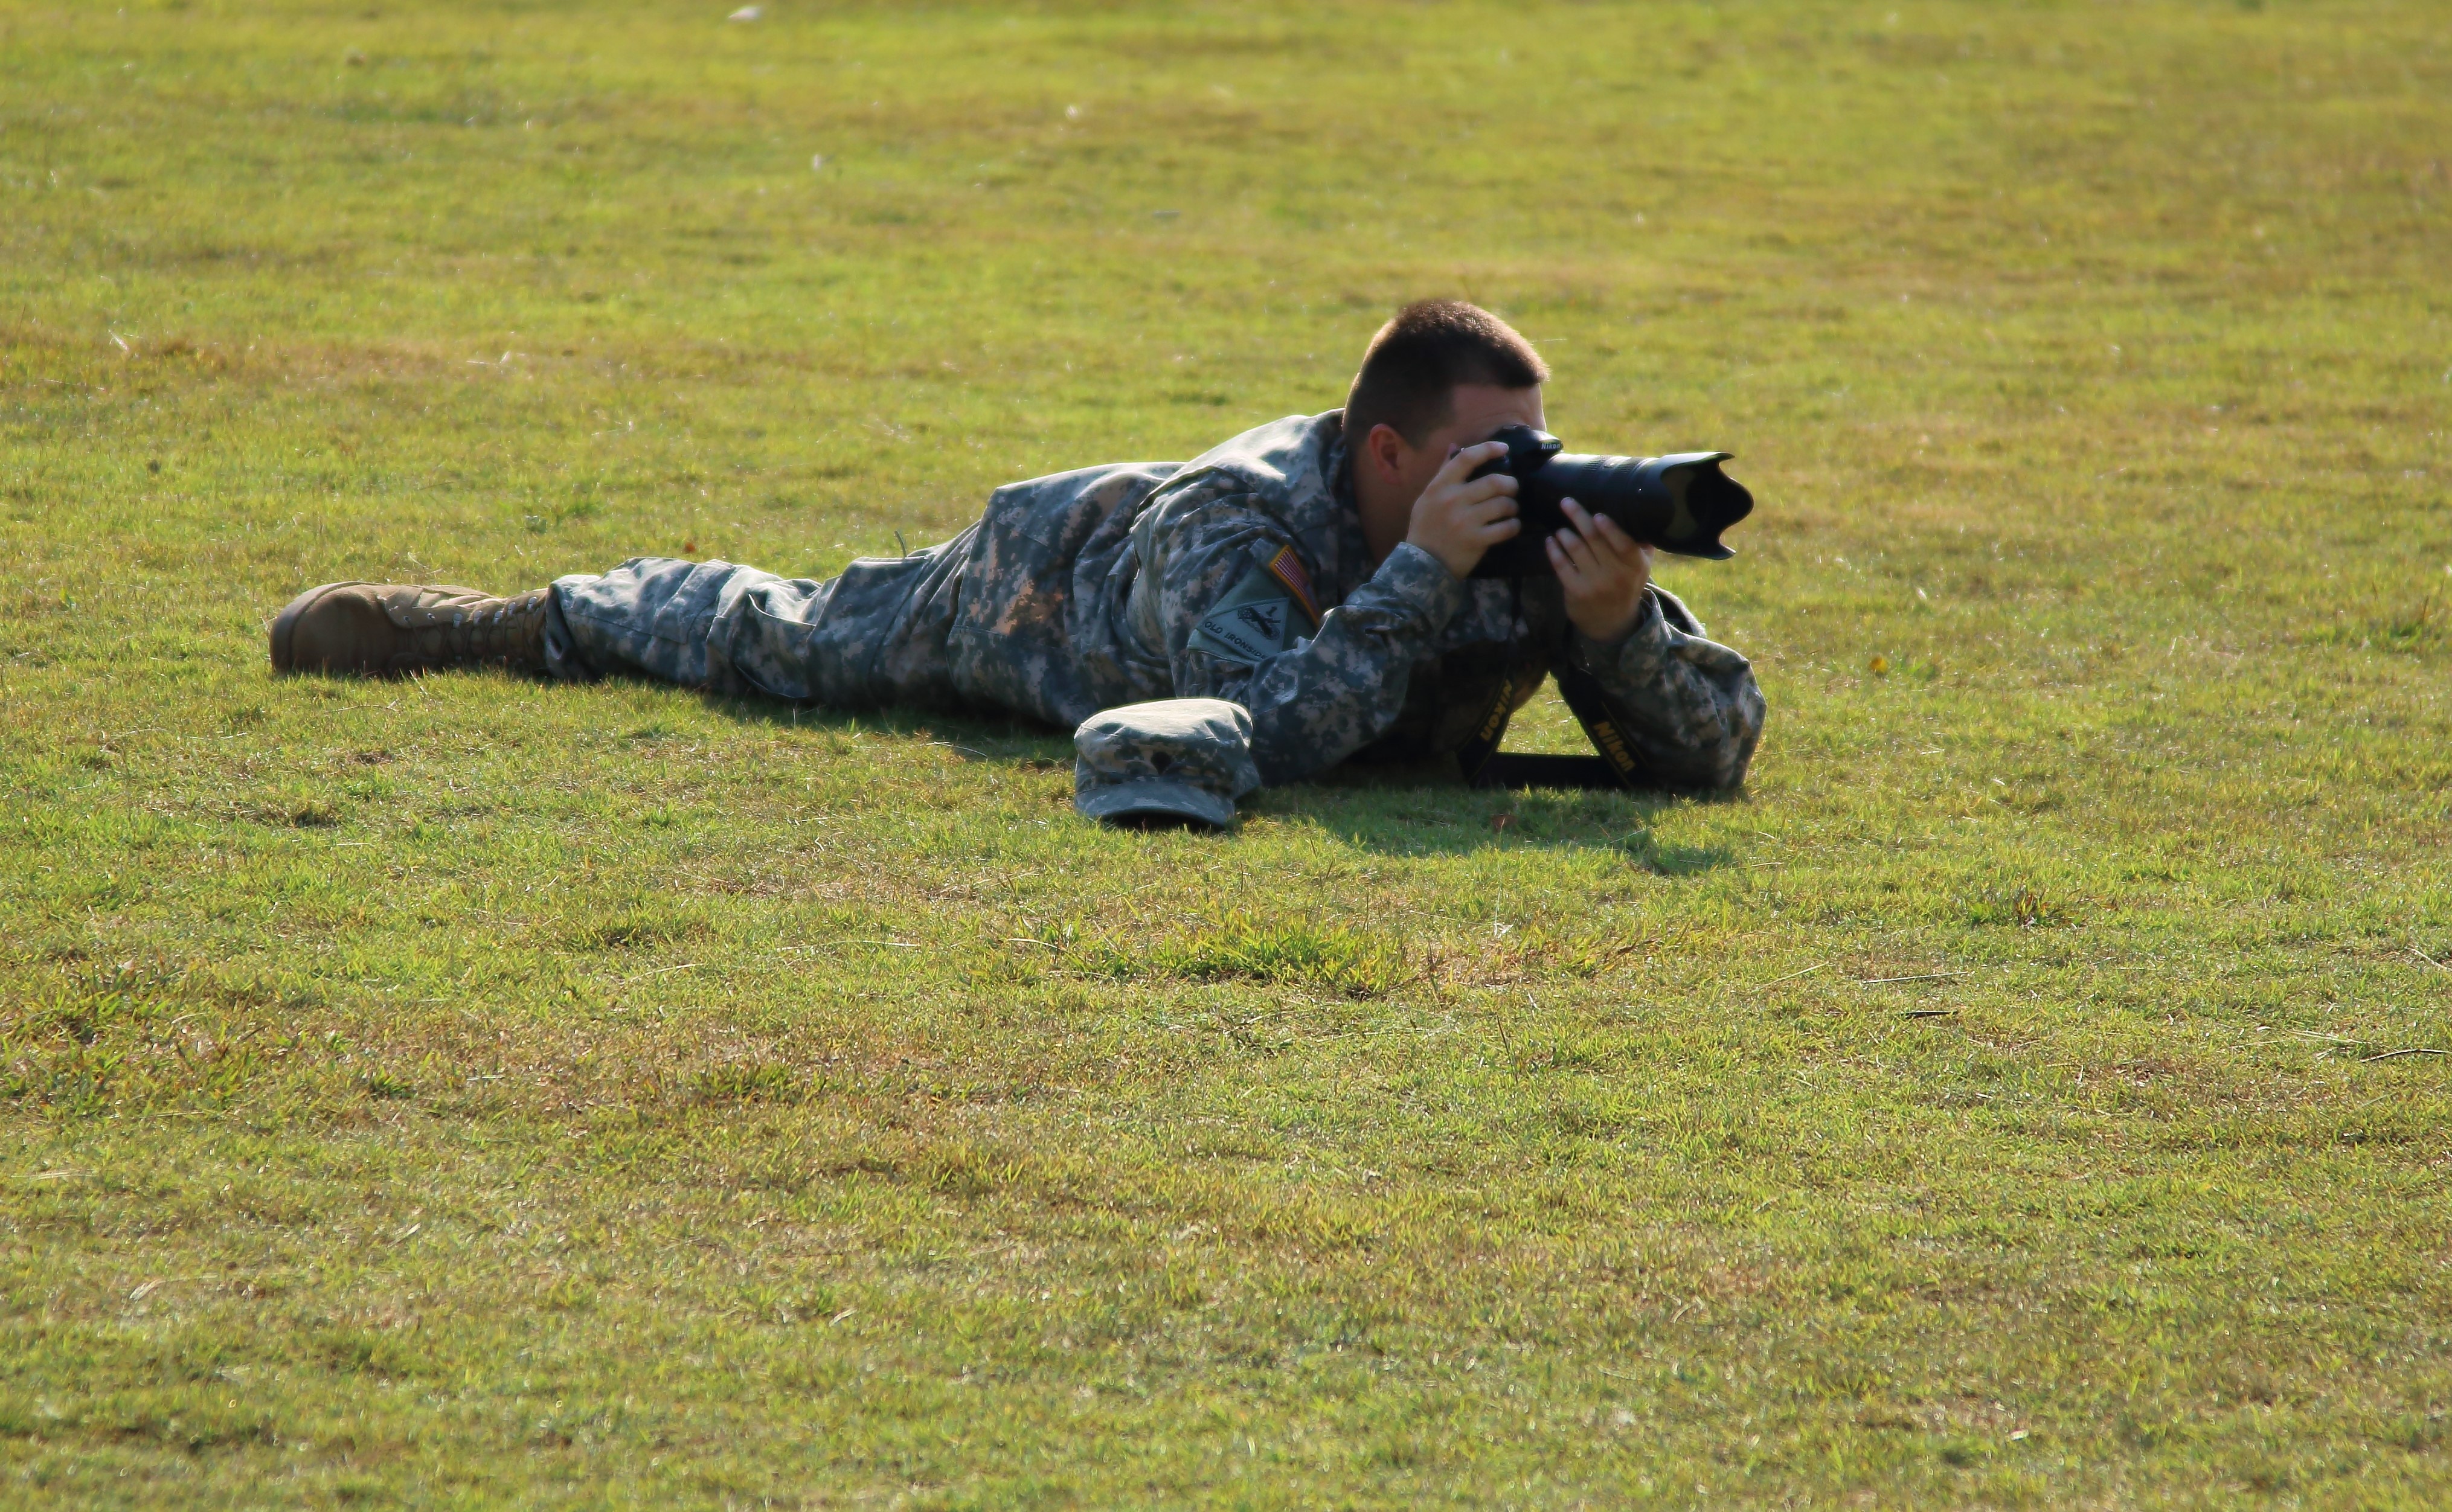 man in camouflage soldier uniform holding bridge camera lying on grass at daytime